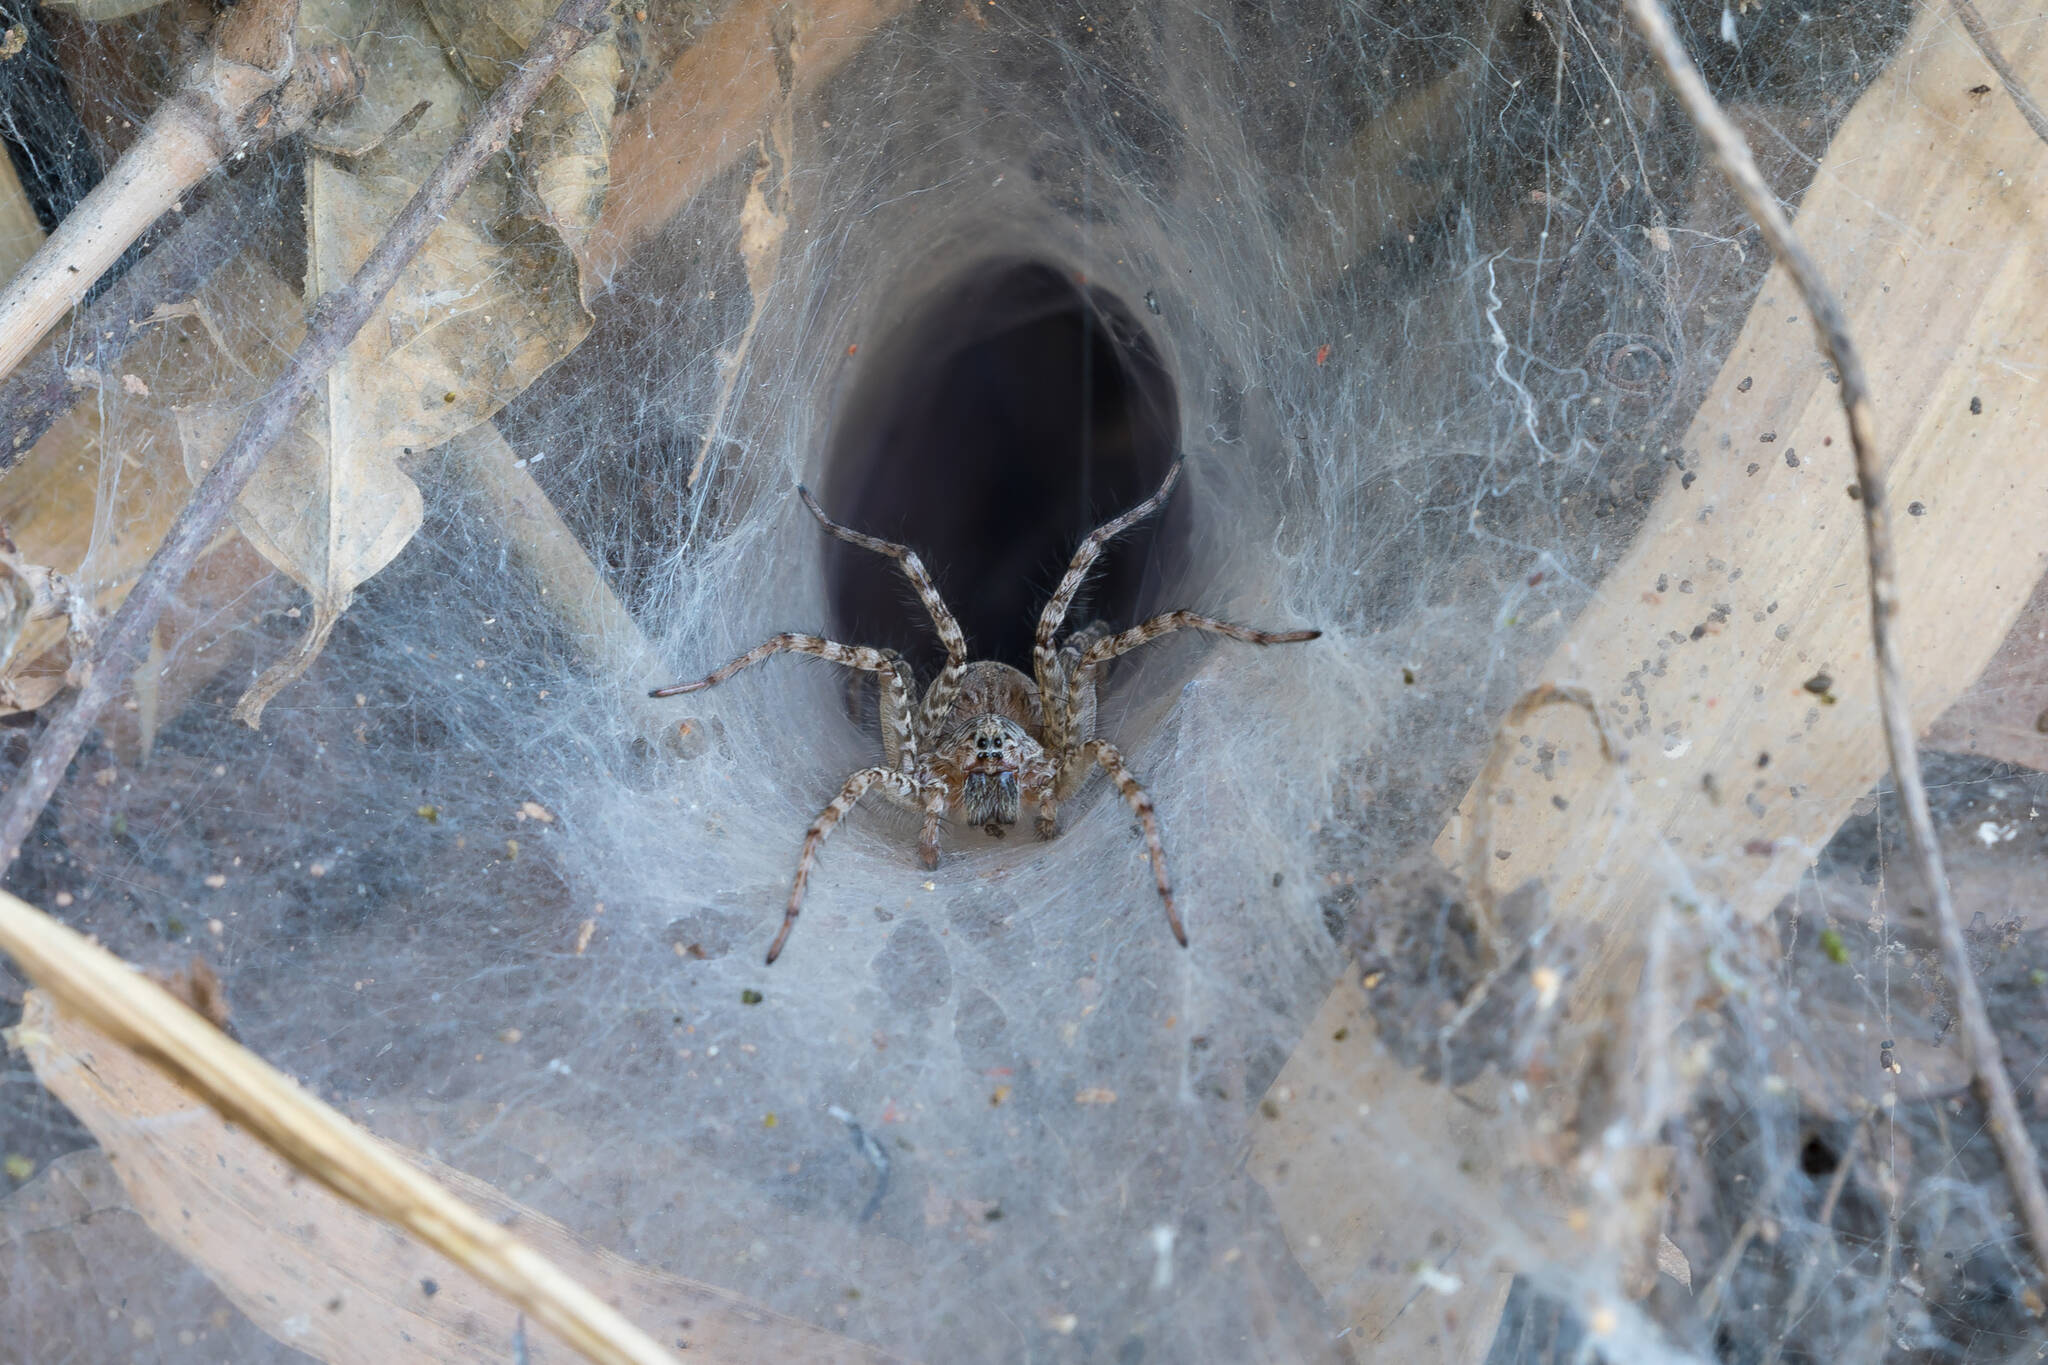 This photo available under a Creative Commons license shows a lawn wolf spider in its funnel web in Laos. (Courtesy Photo / Basile Morin)